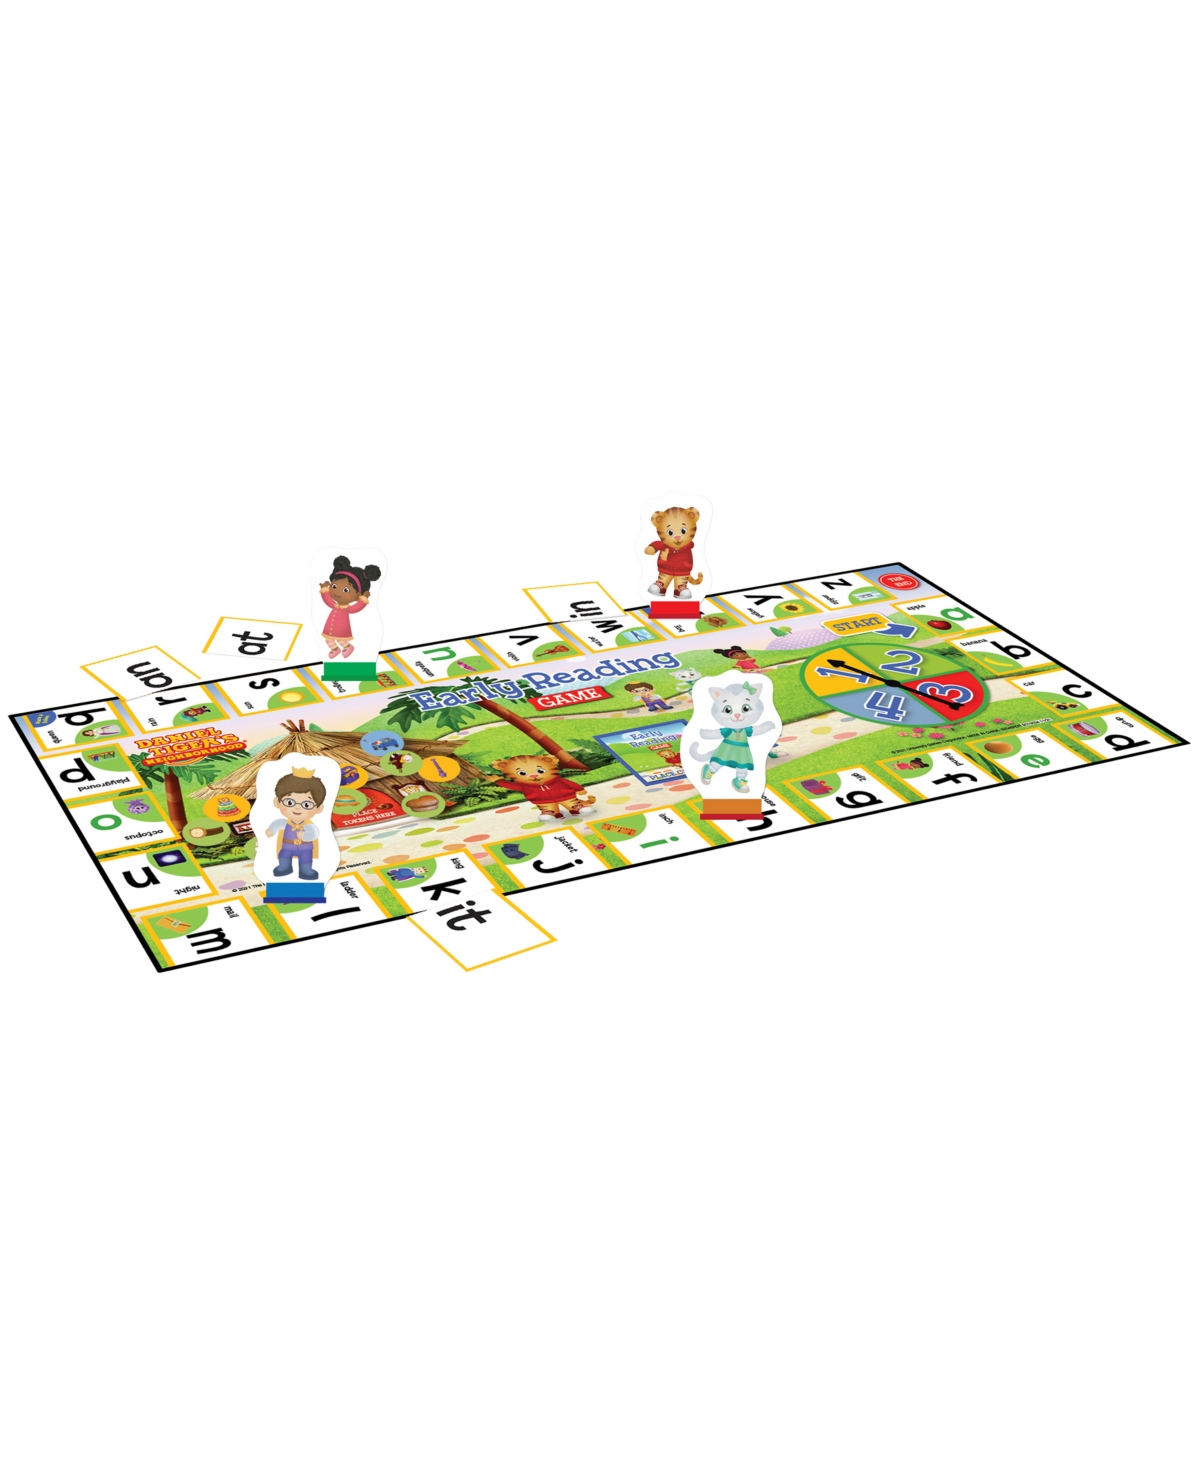 Shop Areyougame Briarpatch Daniel Tiger's Neighborhood Early Reading Game In Multi Color